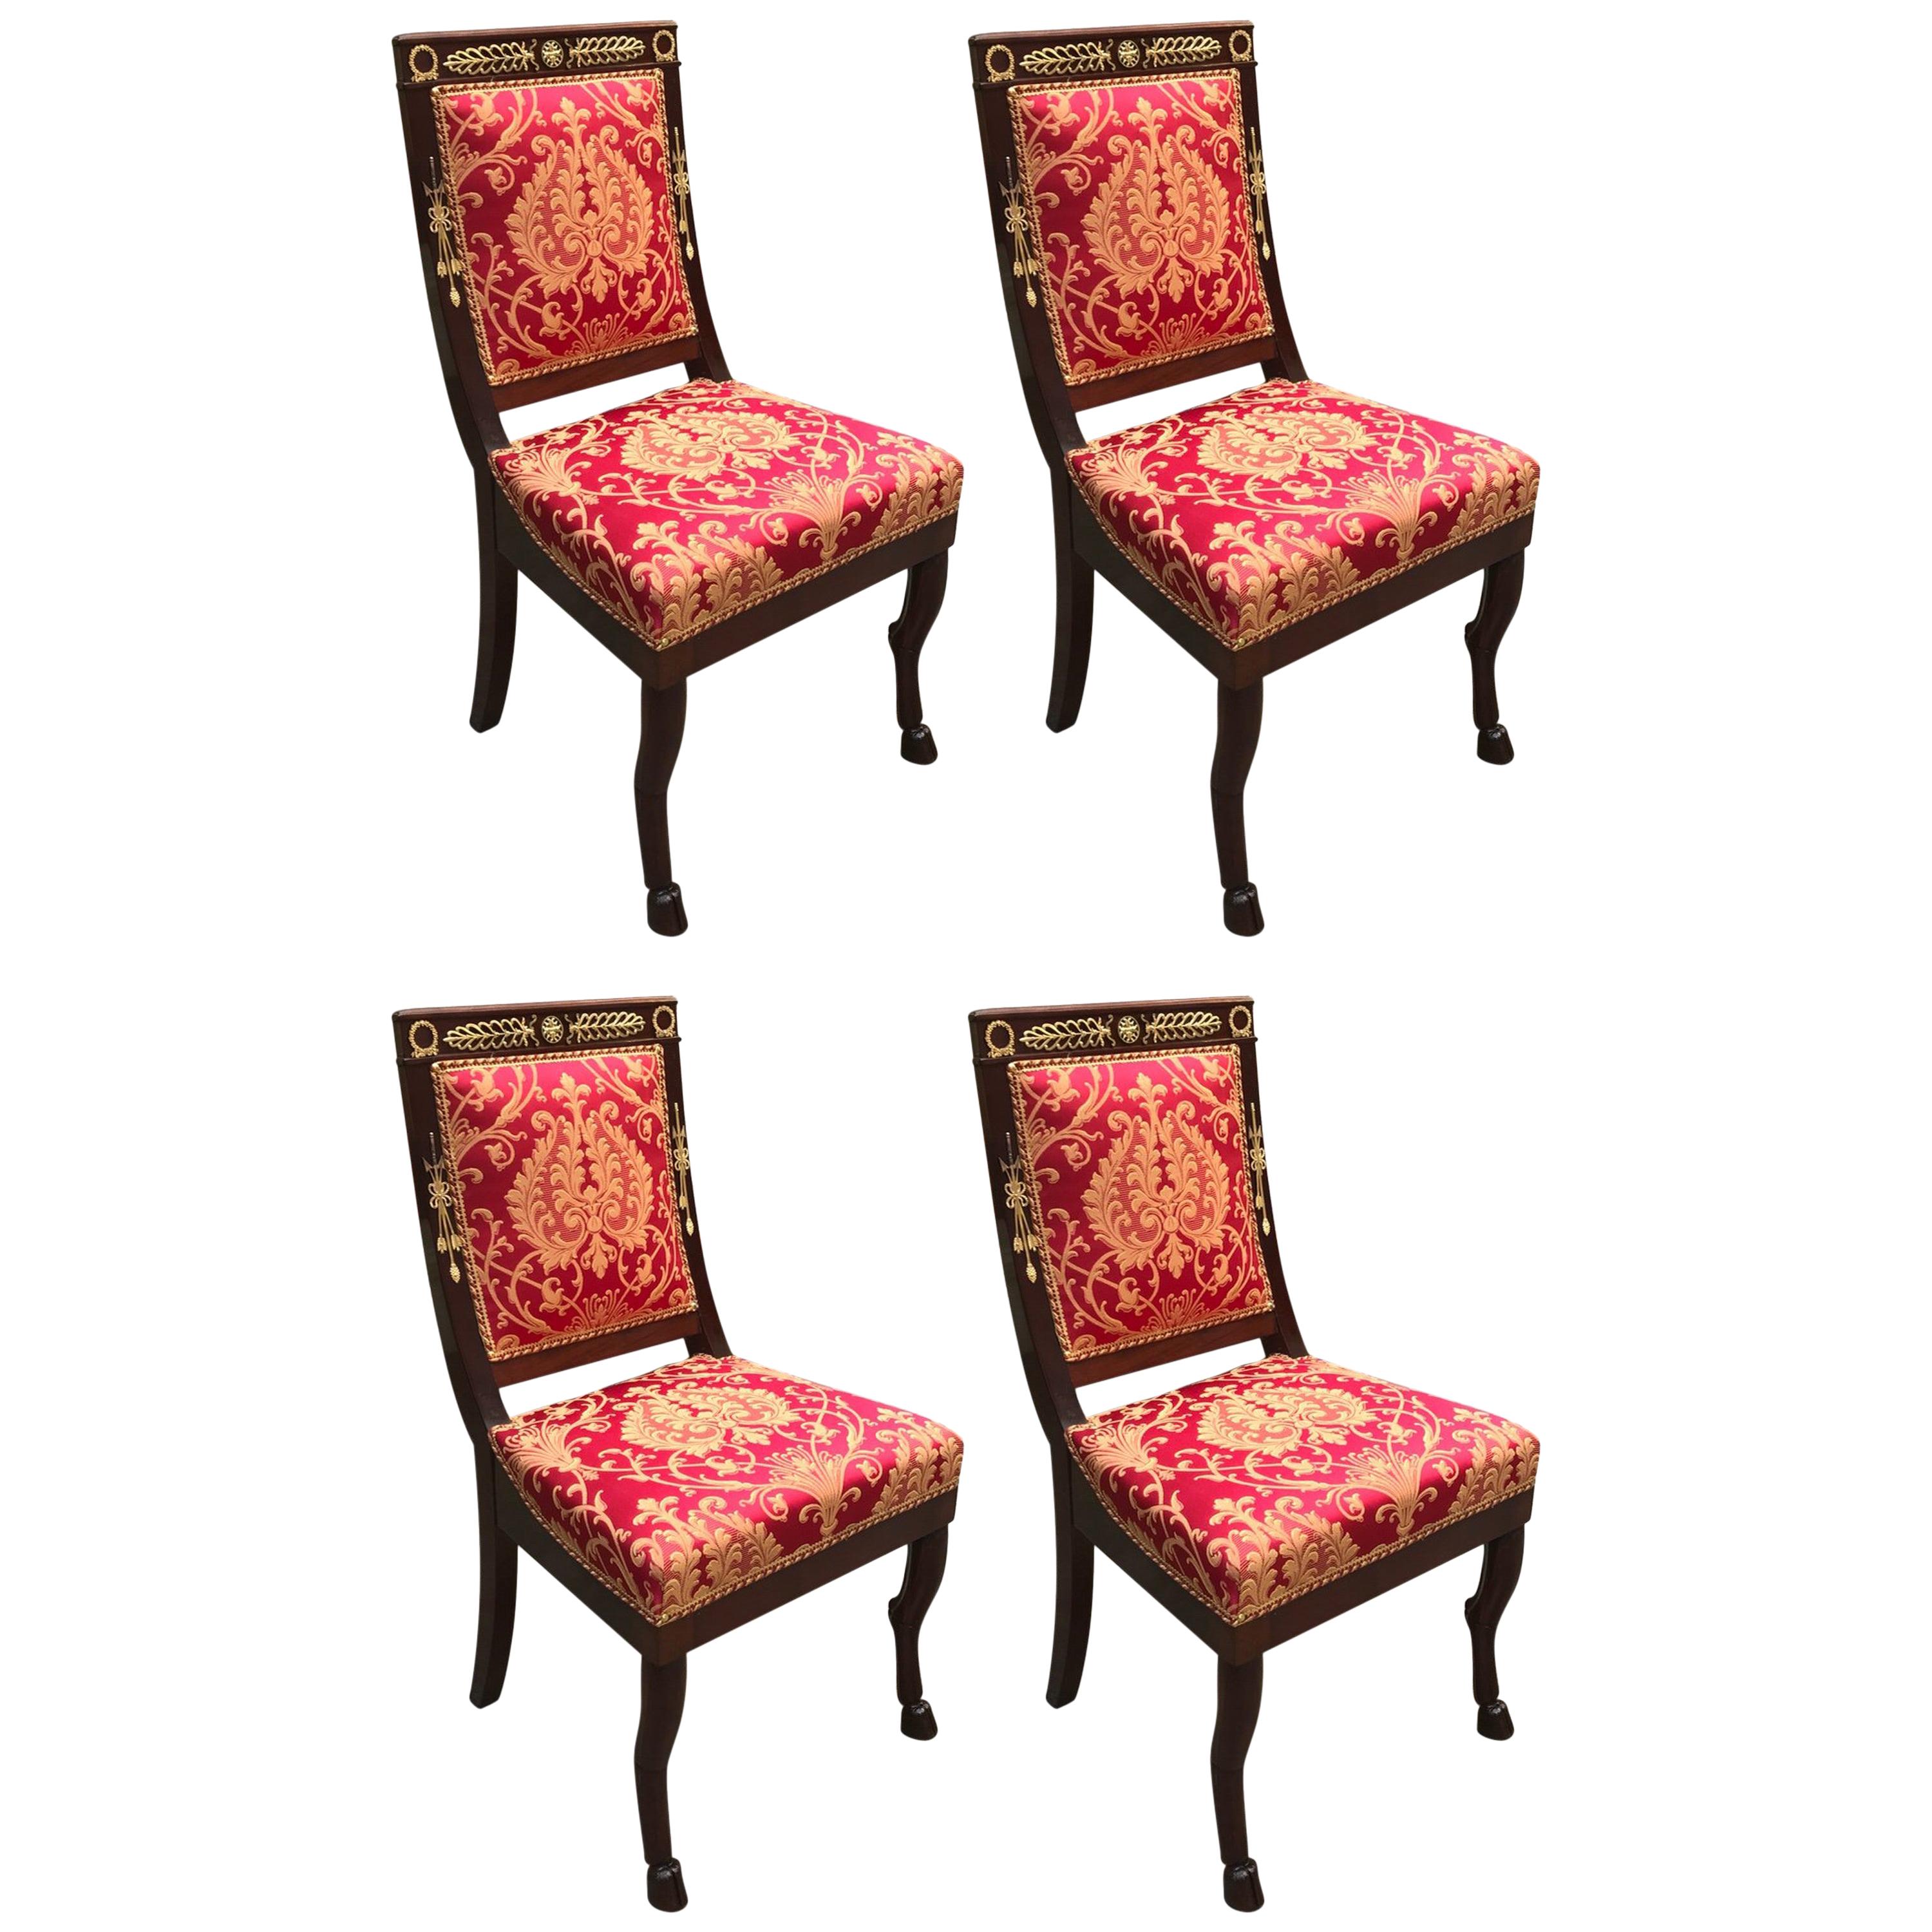 Four Italian Dining Chairs Empire Style Red Gold Upholstery 20th Century